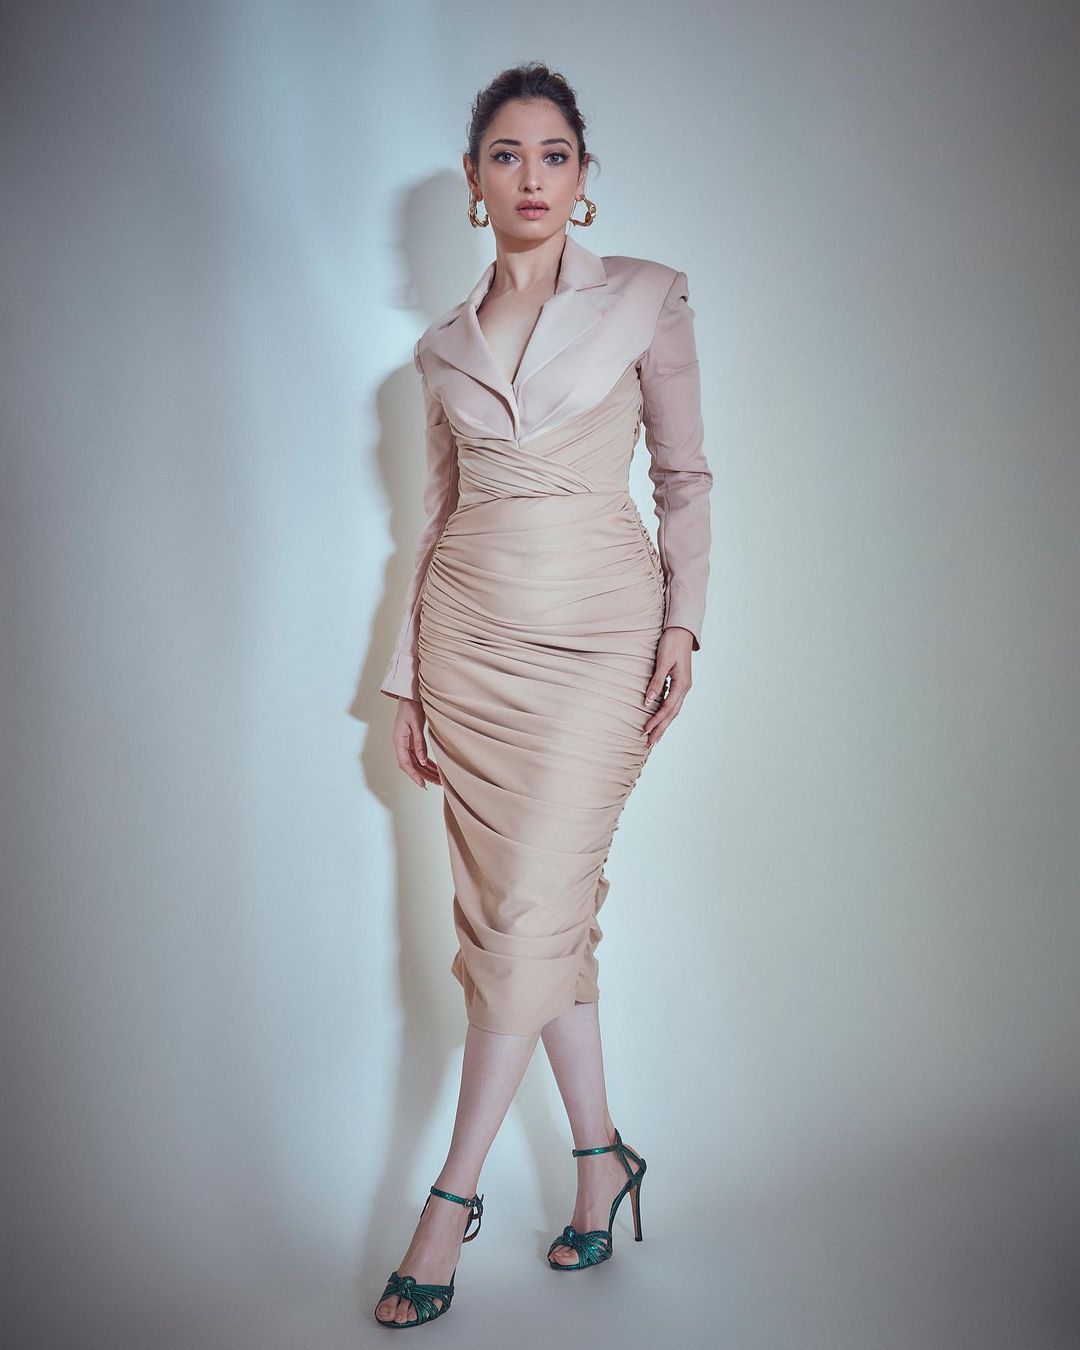 Tamannaah Bhatia looks elegant in the nude blazer-style top and ruched skirt